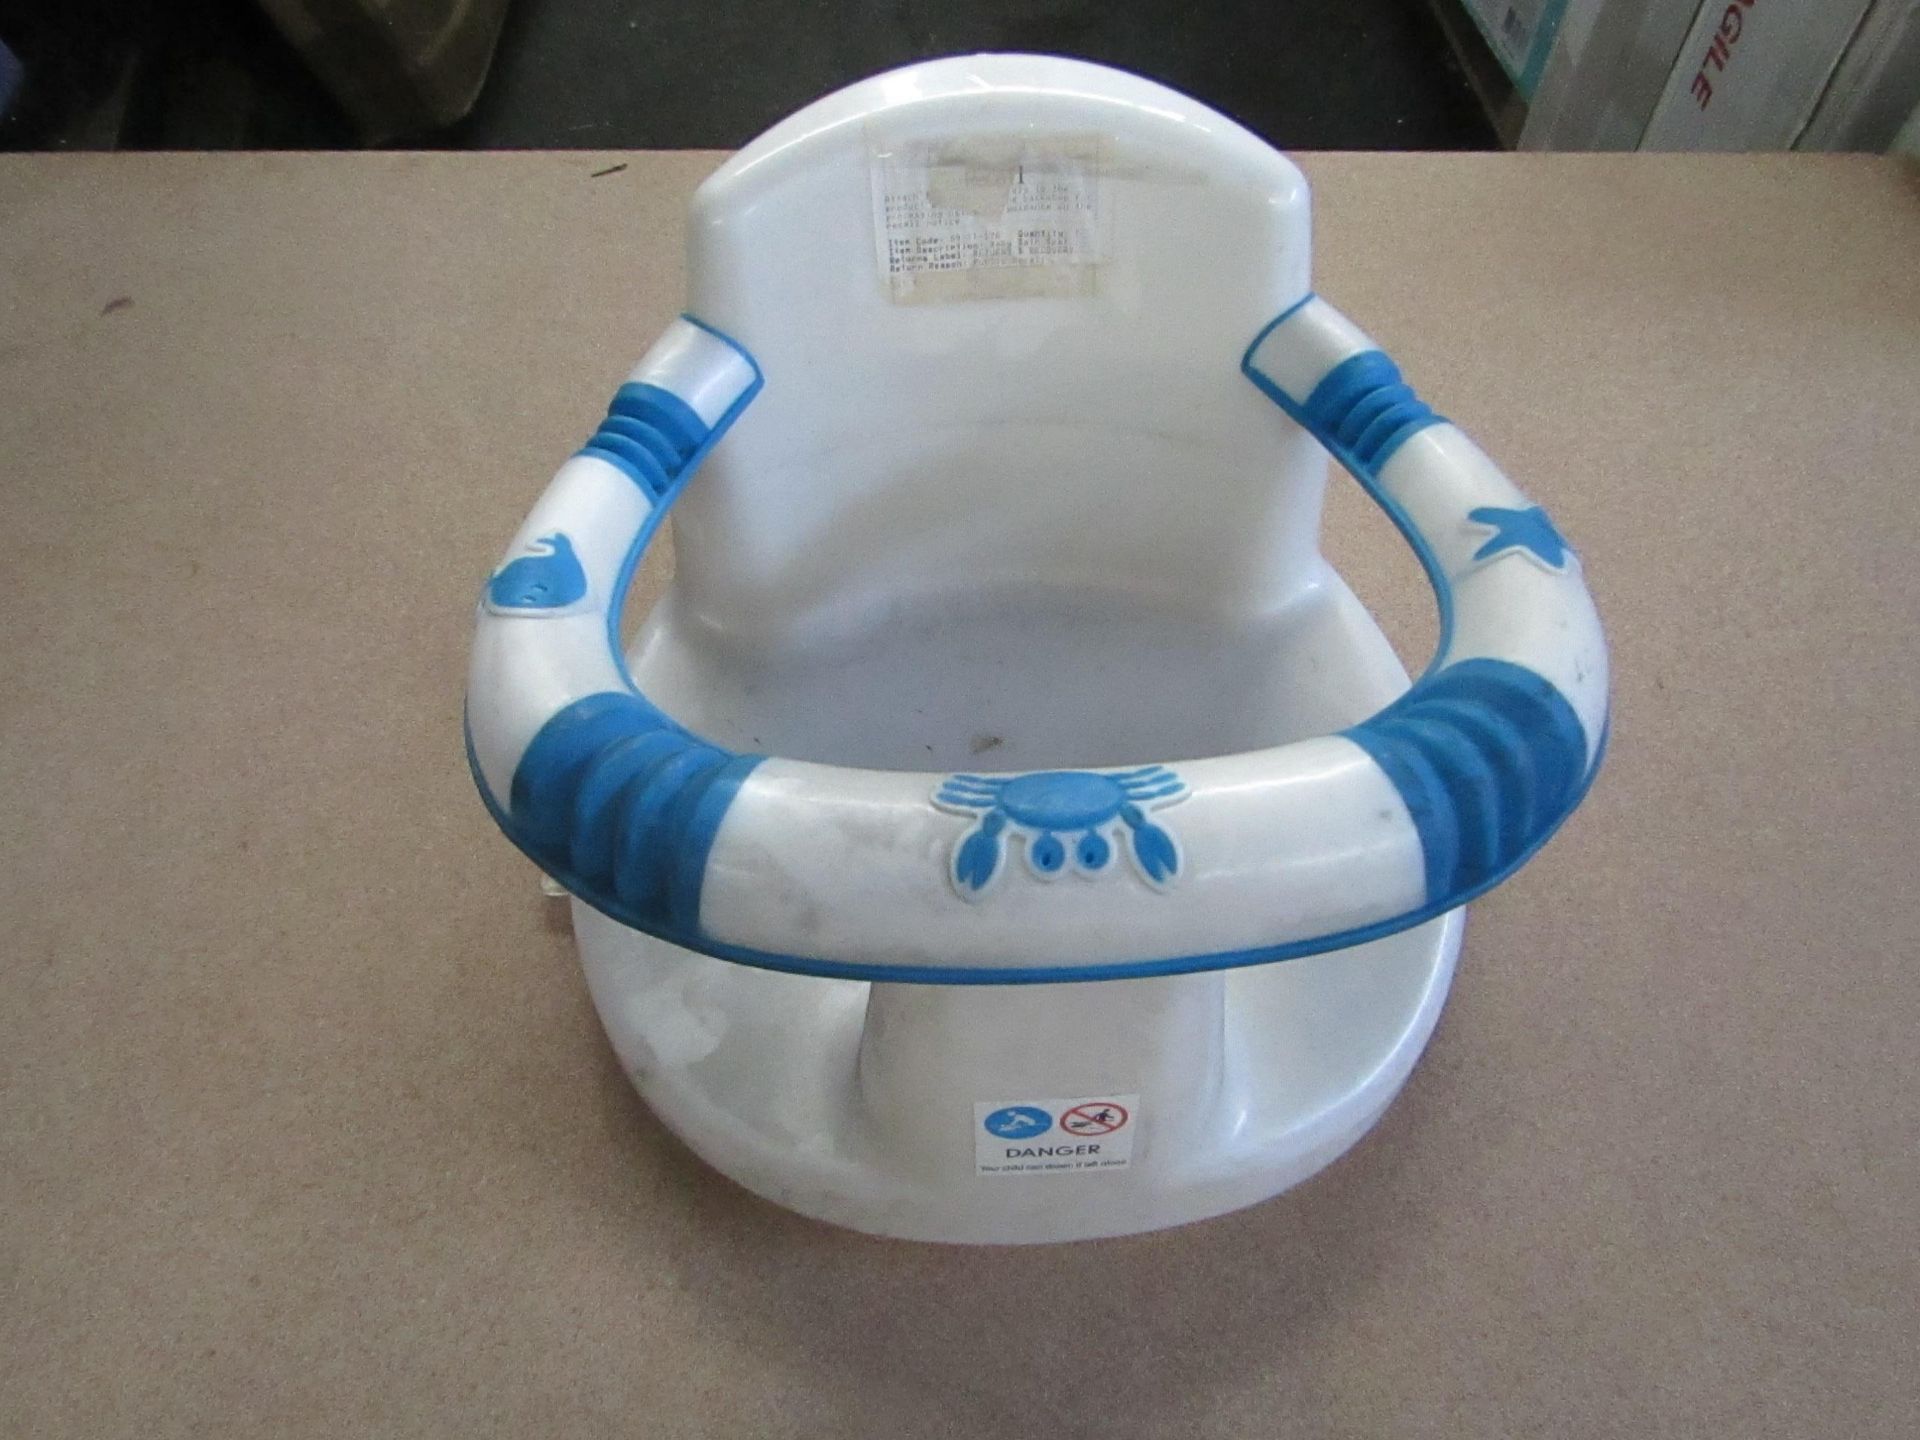 2x Baby Bath Seat ( Suction Cups For Security ) - Blue & White - No Packaging.